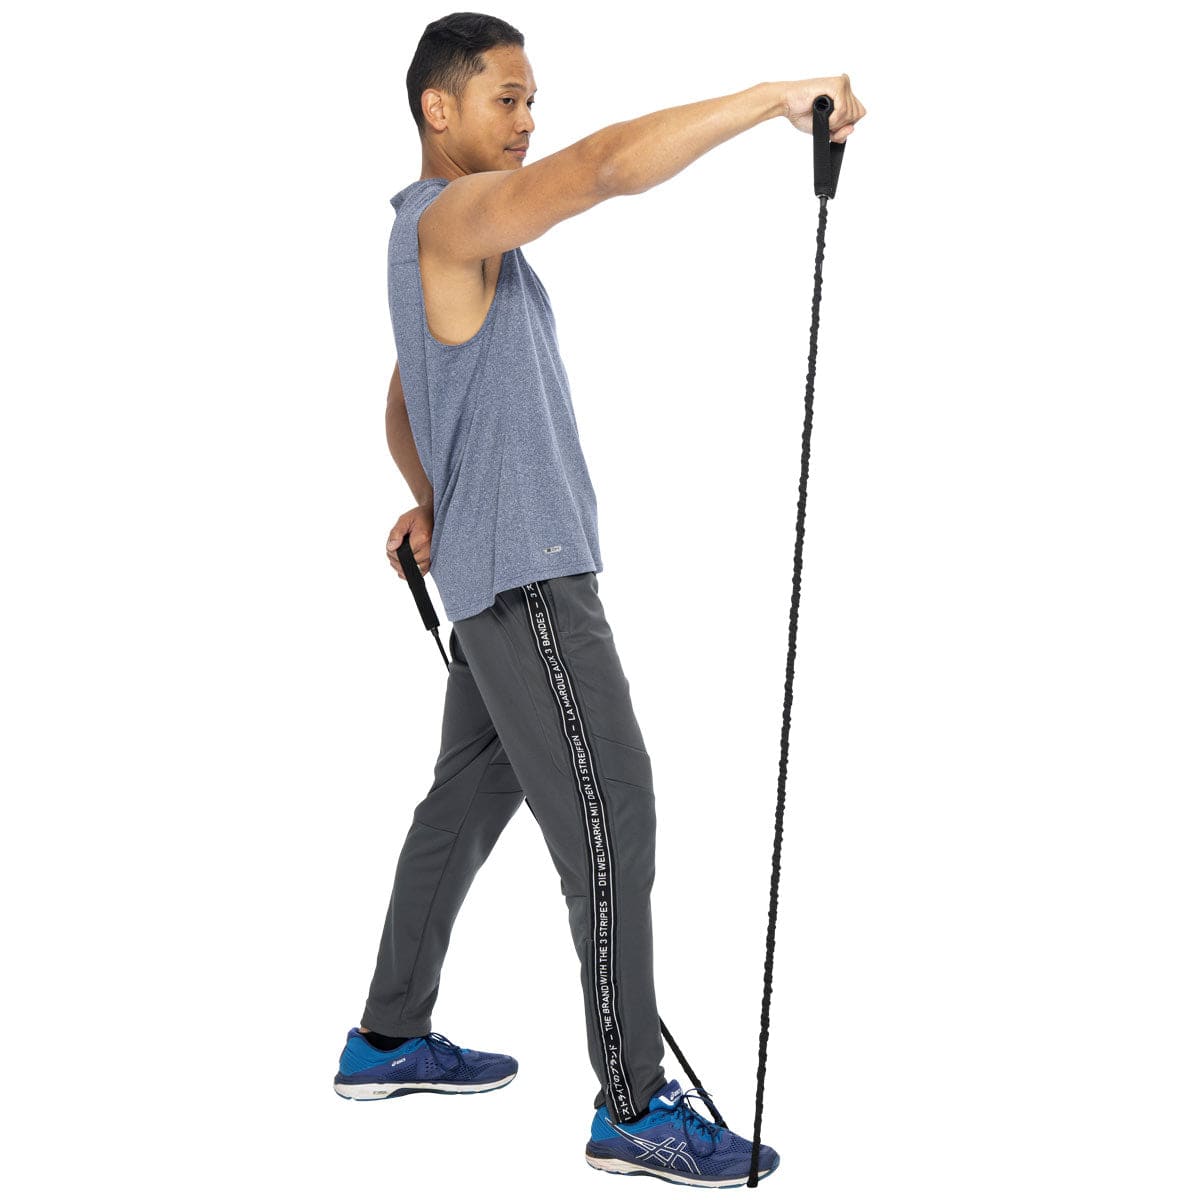 Bungee Stretch Resistance Band - Displayer of 6